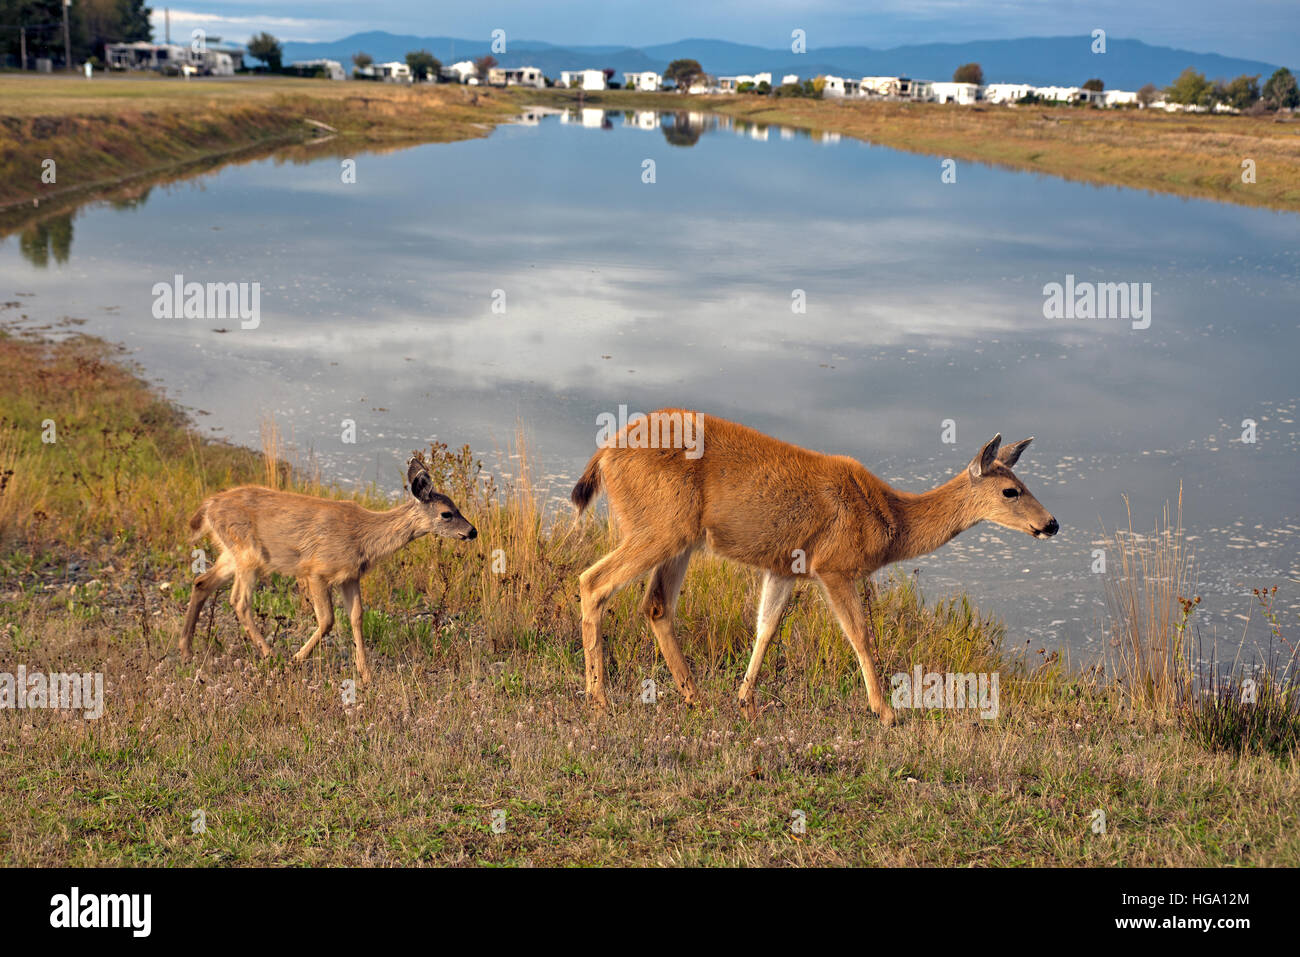 Female Black Tailed Deer and calf (Odocoileus hemionus) at Surfside Park at Parksville, BC Vancouver Island Canada. SC0 11,361. Stock Photo